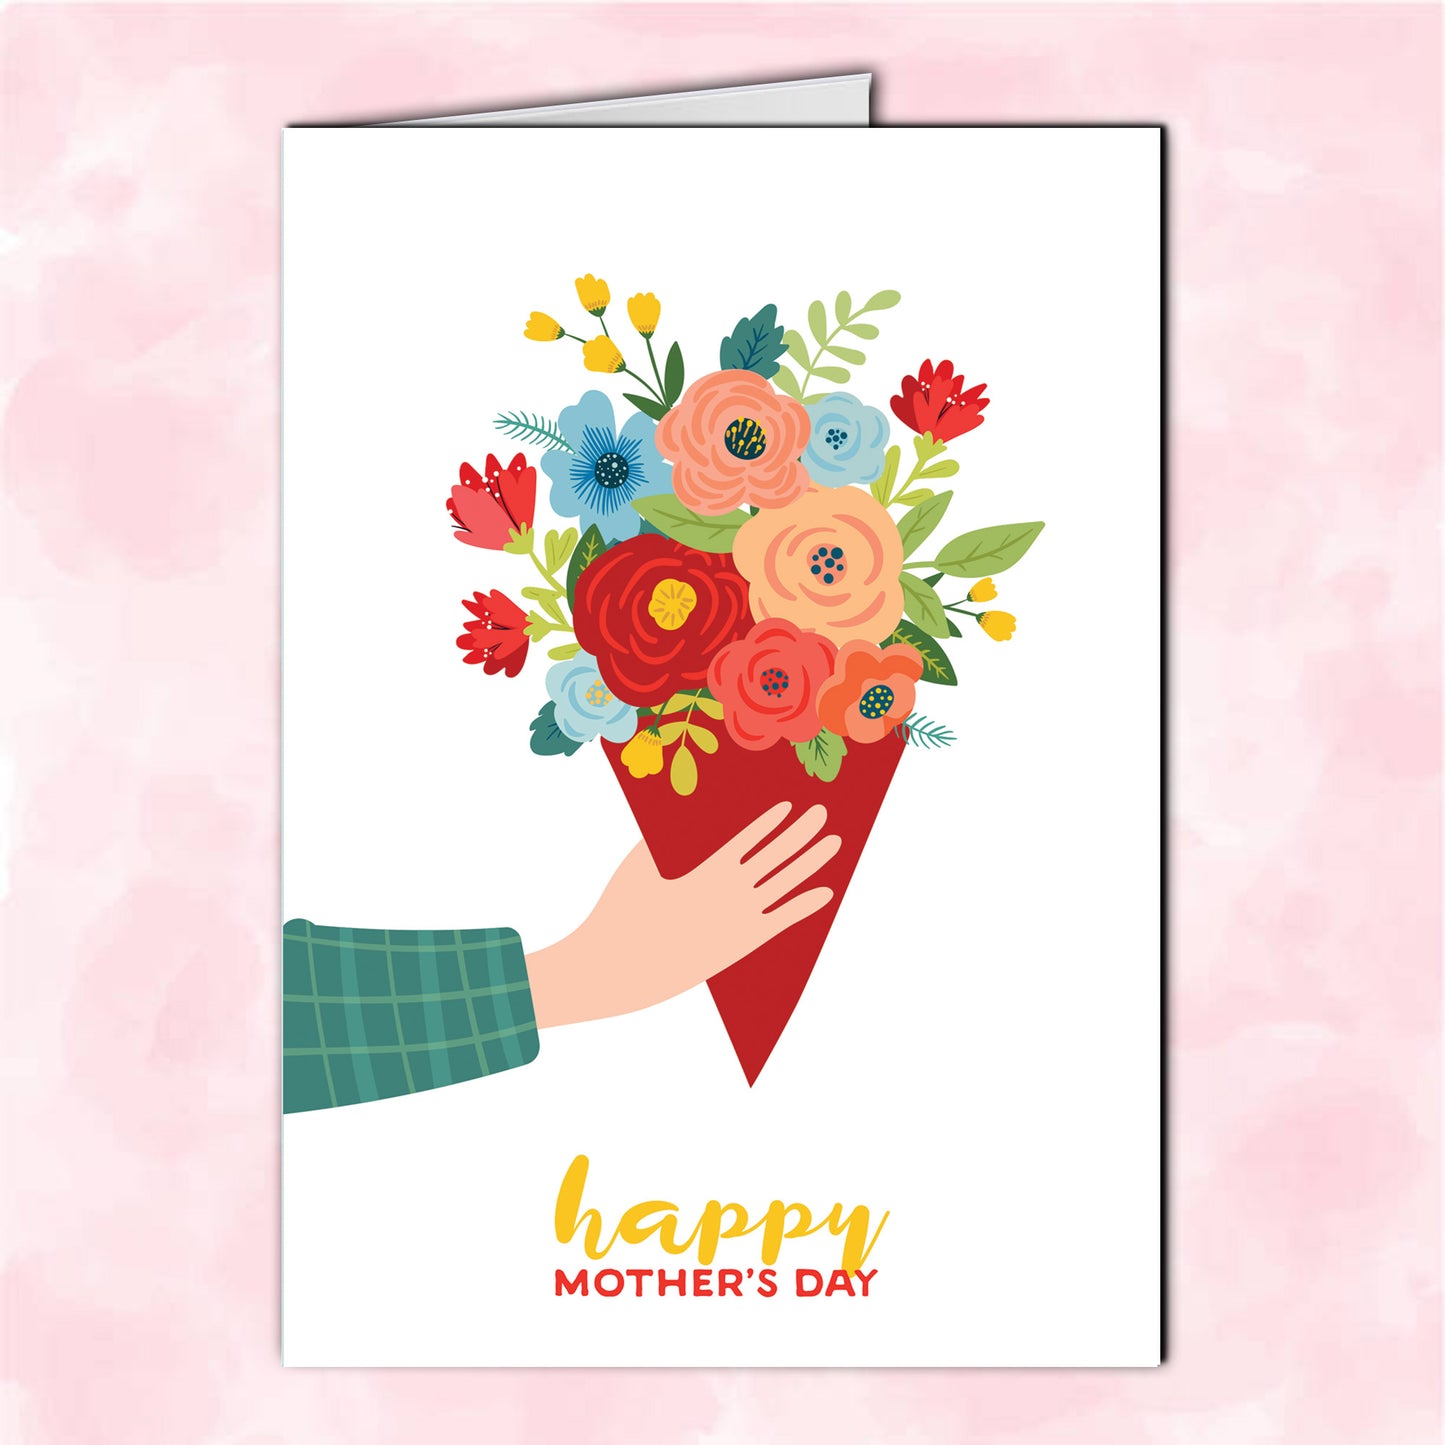 Happy Mother's Day Flower Bouquet Card